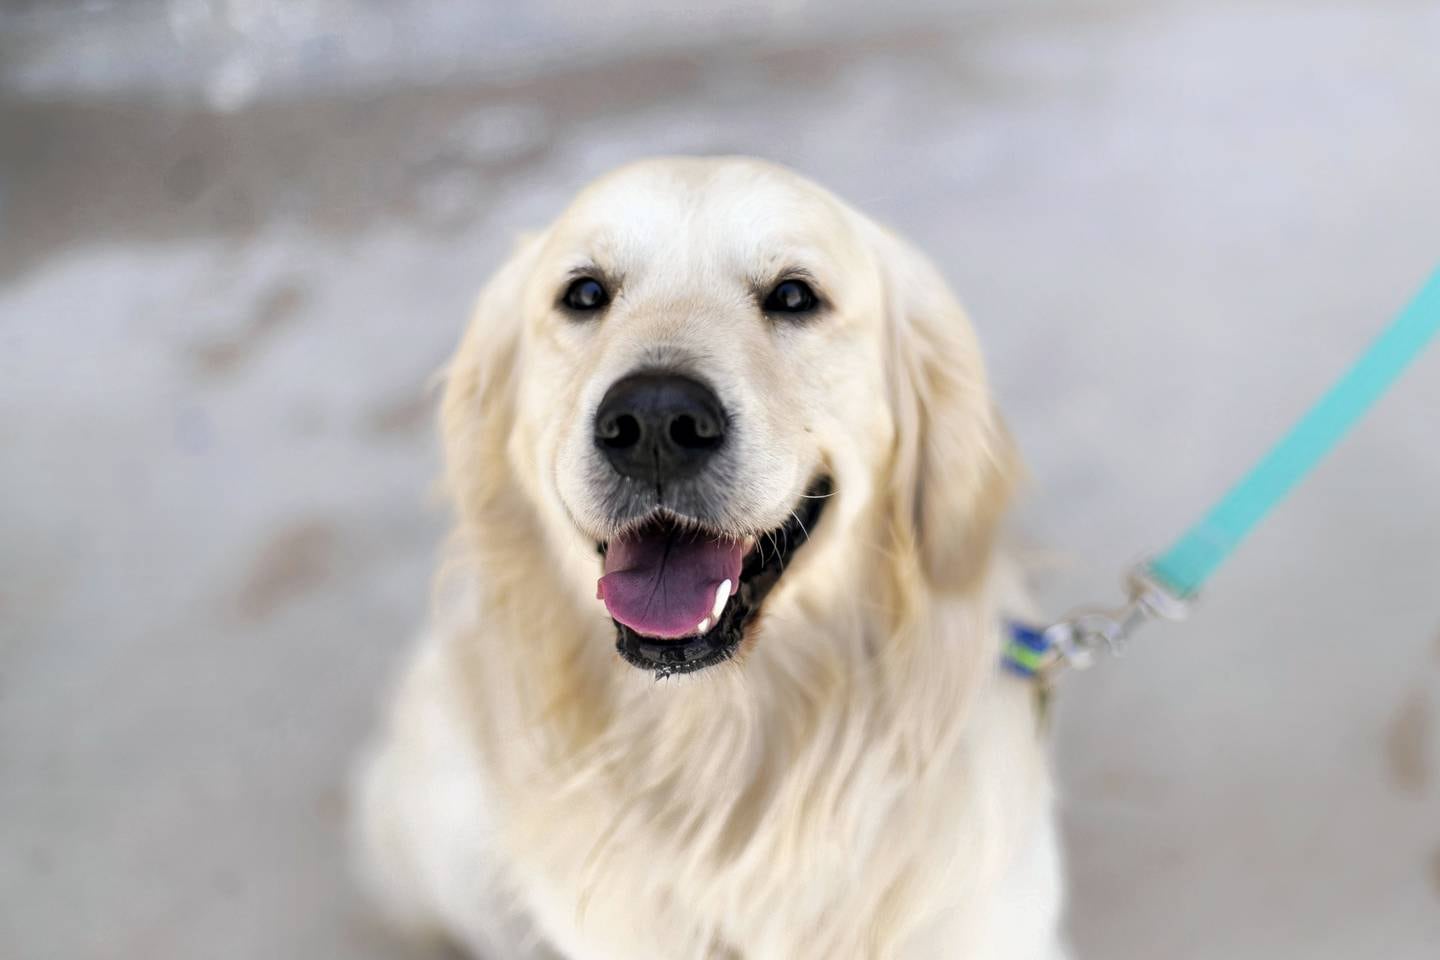 ABU DHABI, UNITED ARAB EMIRATES - JUNE 1 2019.Harvey the Golden Retriever, is currently being trained by Reading Dogs Abu Dhabi.Reading Dogs. In order to qualify as a Reading Dog, each dog has to go through a rigorous assessment programme overseen by our dog trainer Denise Vertigen.  All Reading Dogs have also been given a clean bill of health by their local vet.(Photo by Reem Mohammed/The National)Reporter: Section: NA